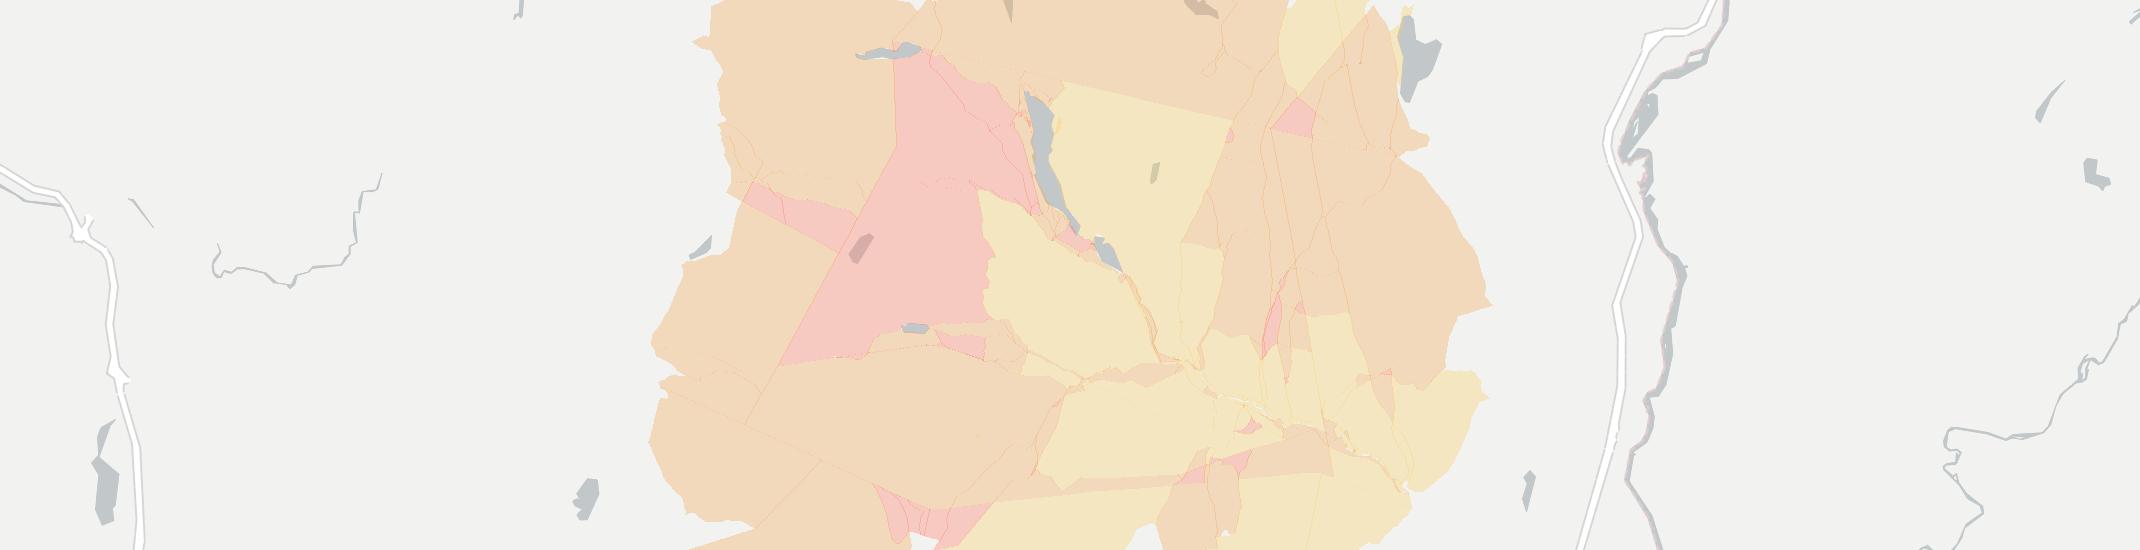 Groton Internet Competition Map. Click for interactive map.